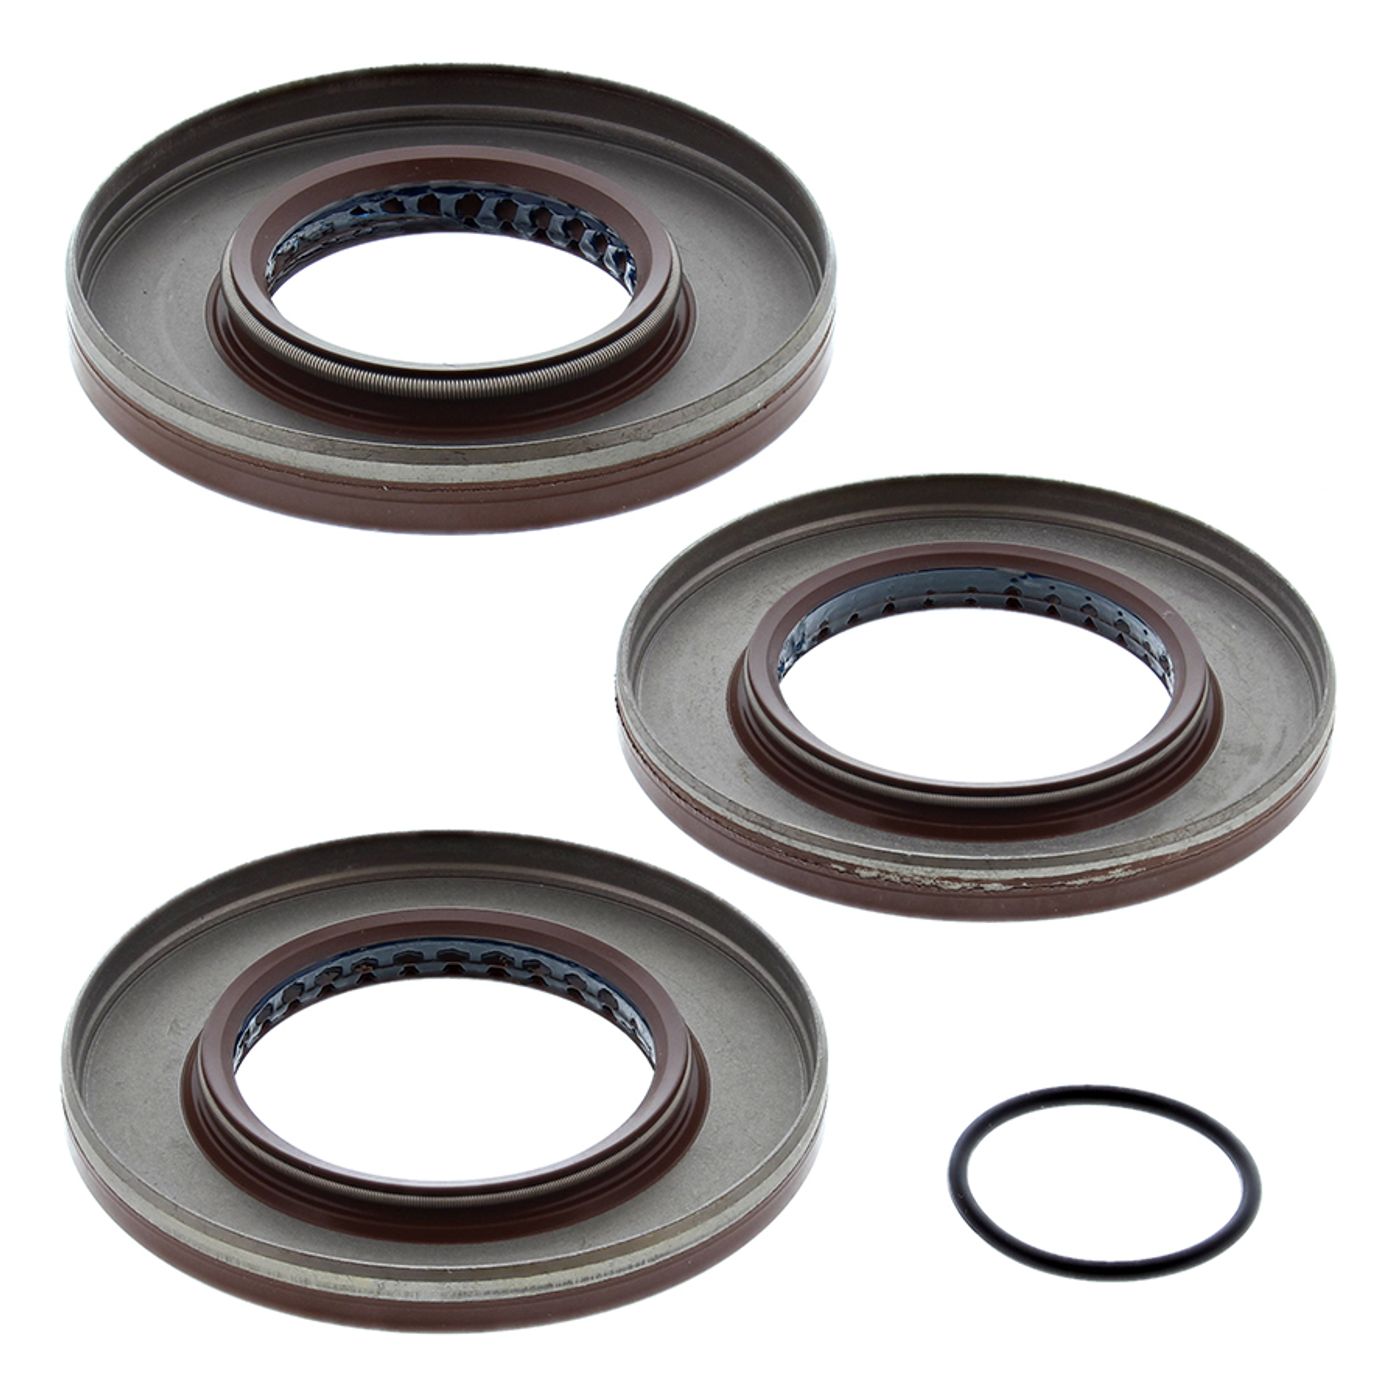 Wrp Diff Seal Kits - WRP252080-5 image